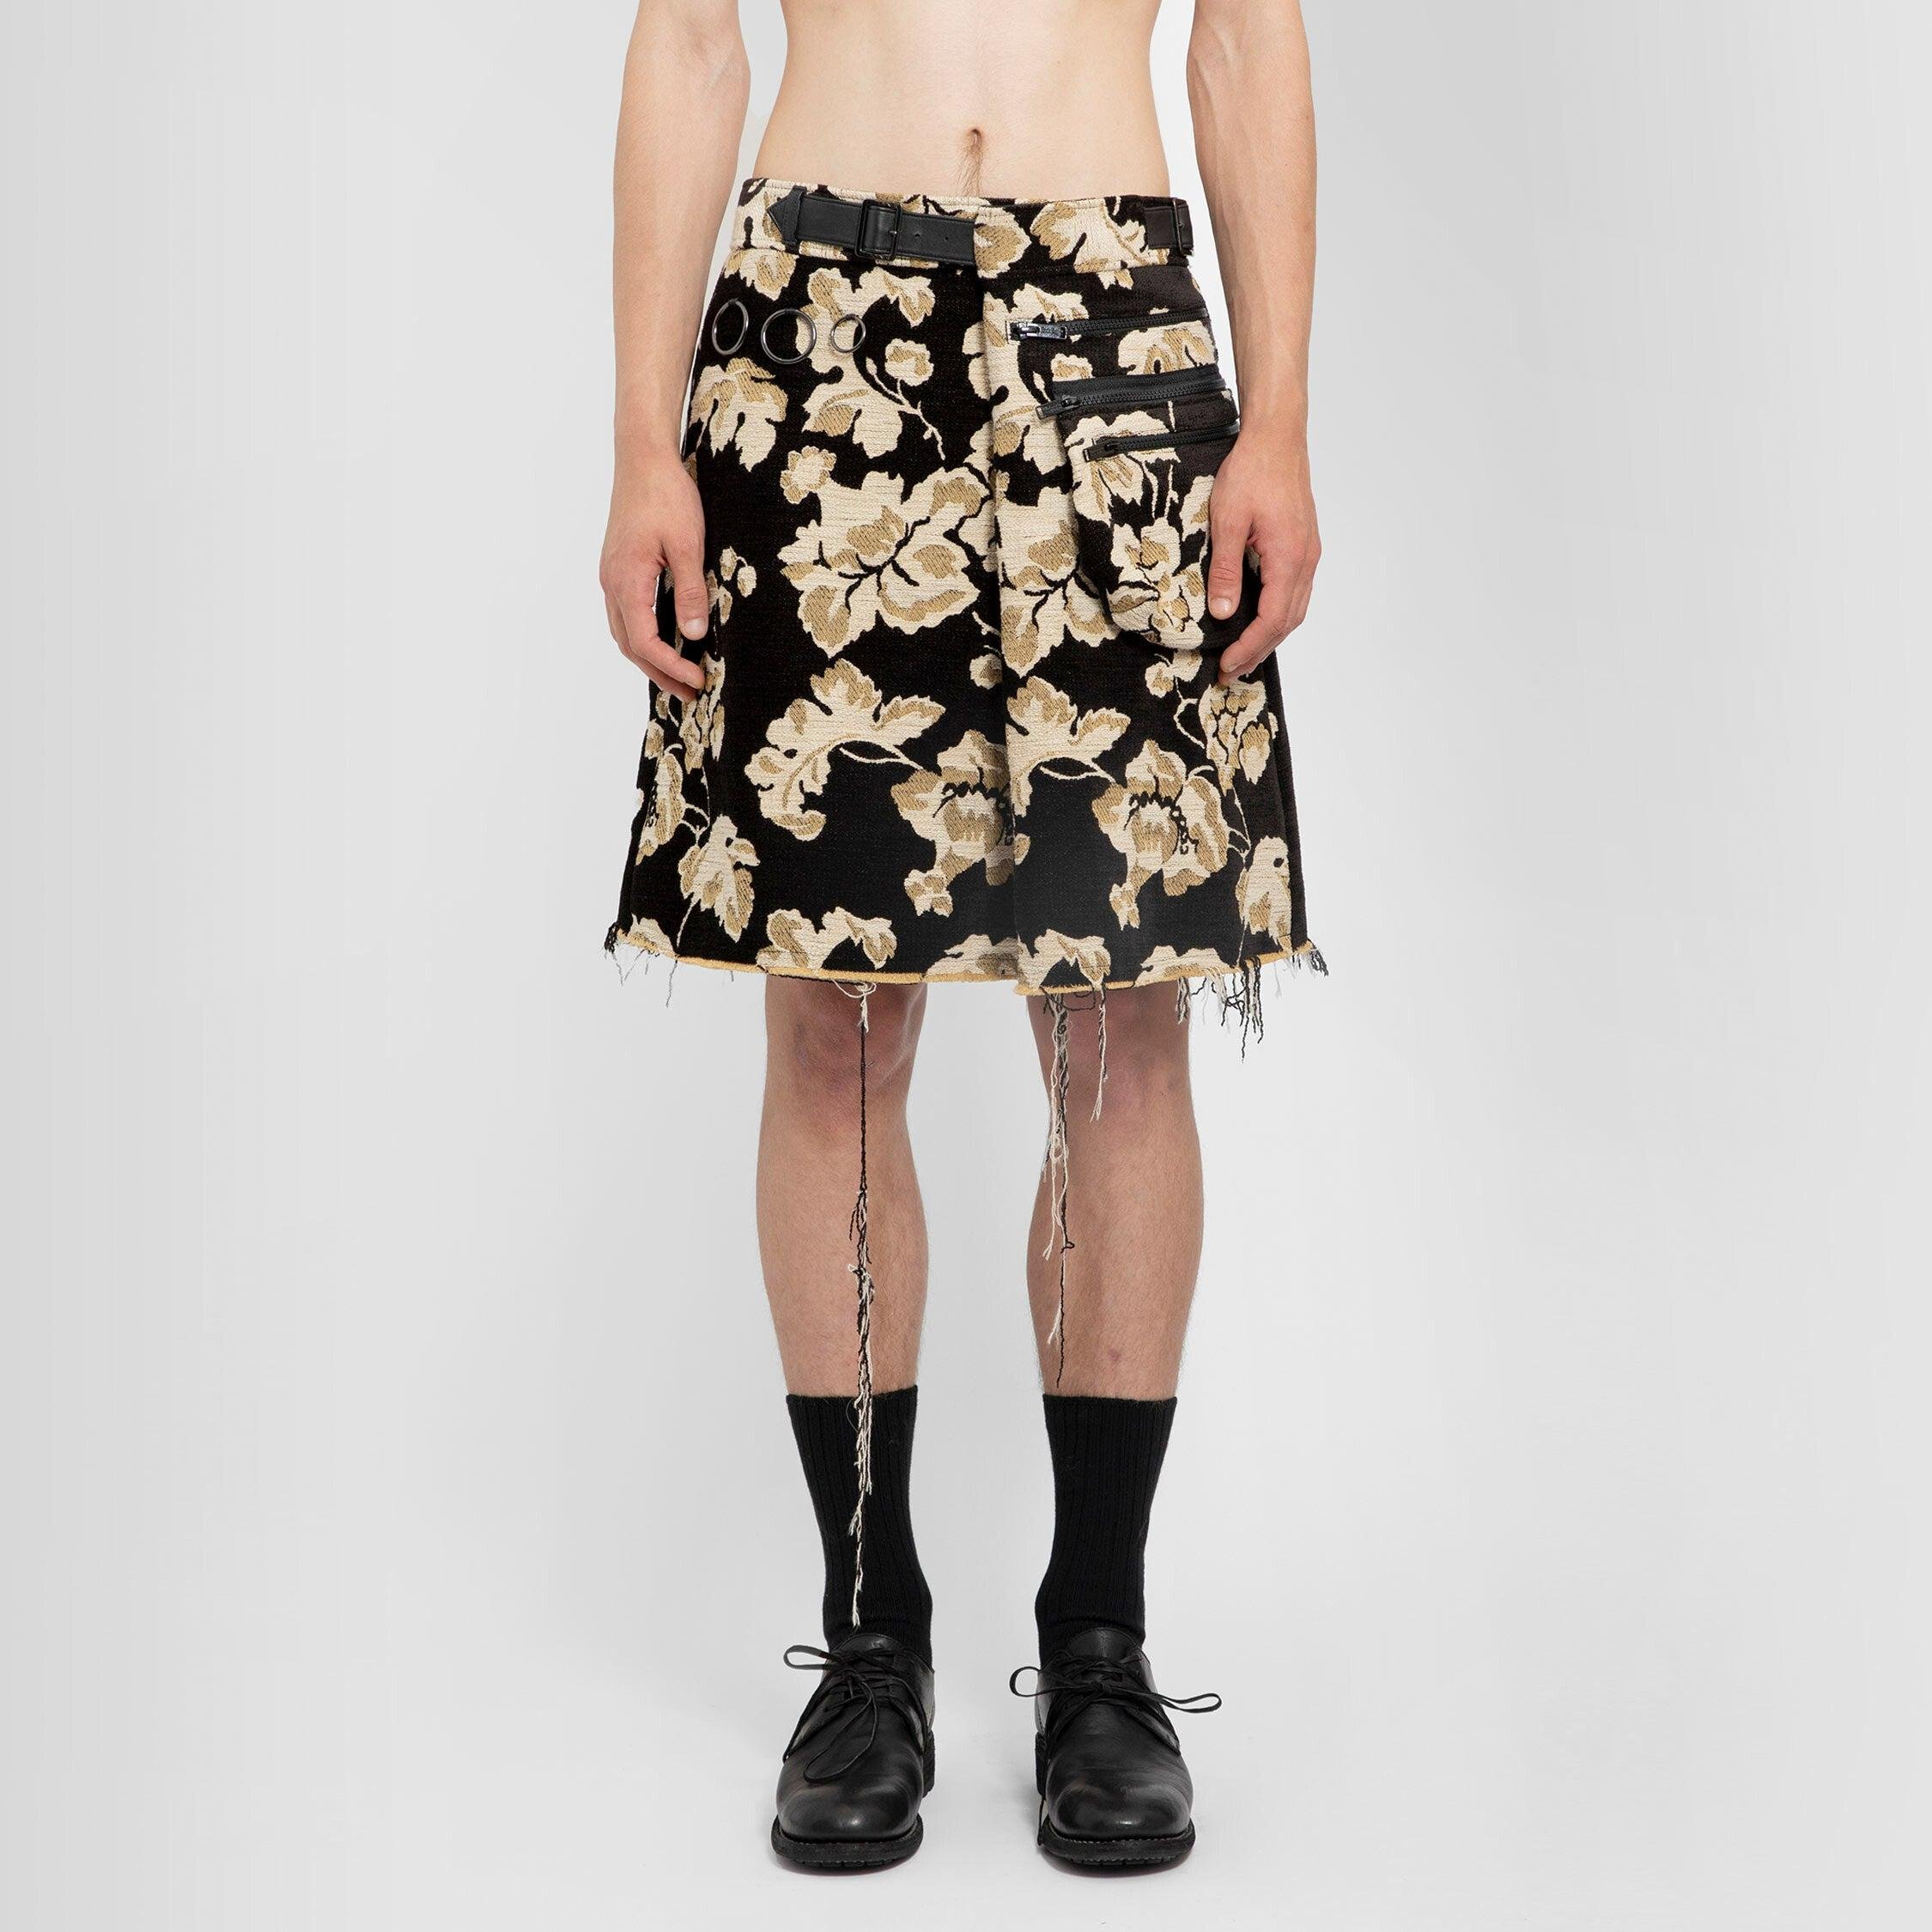 UNDERCOVER MAN MULTICOLOR SKIRTS by UNDERCOVER